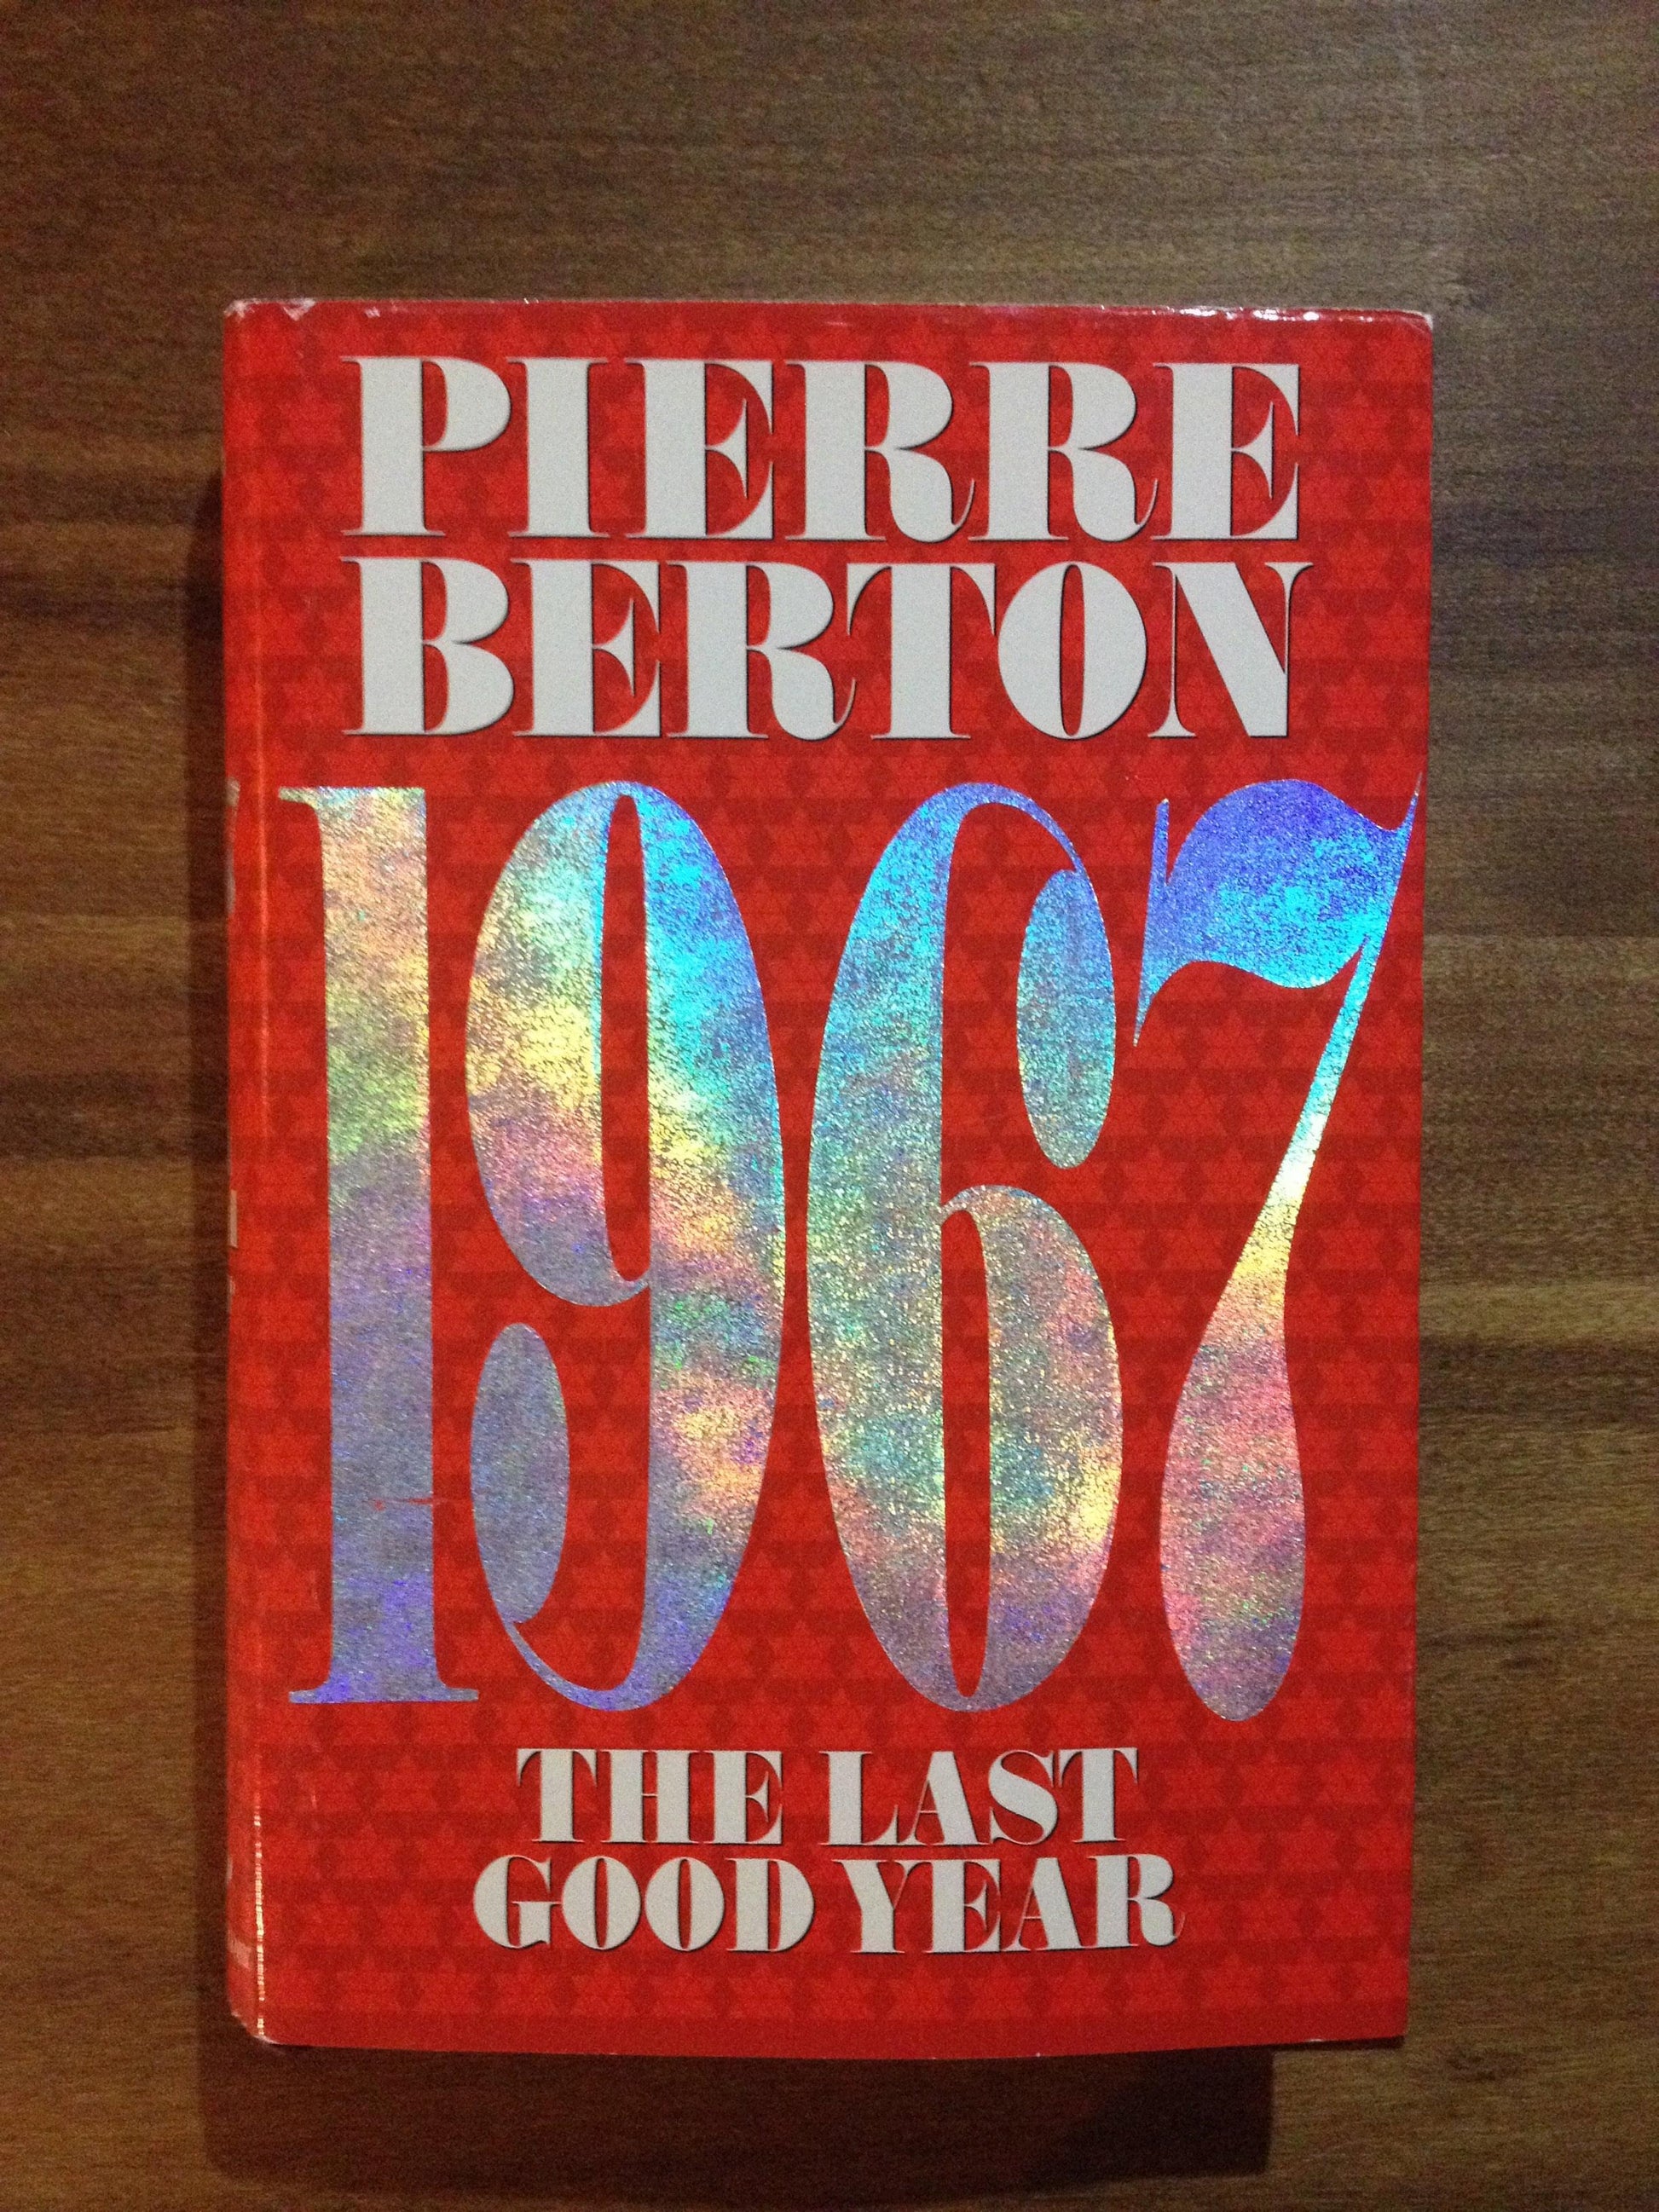 1967, THE LAST GOOD YEAR  BY: PIERRE BERTON BooksCardsNBikes